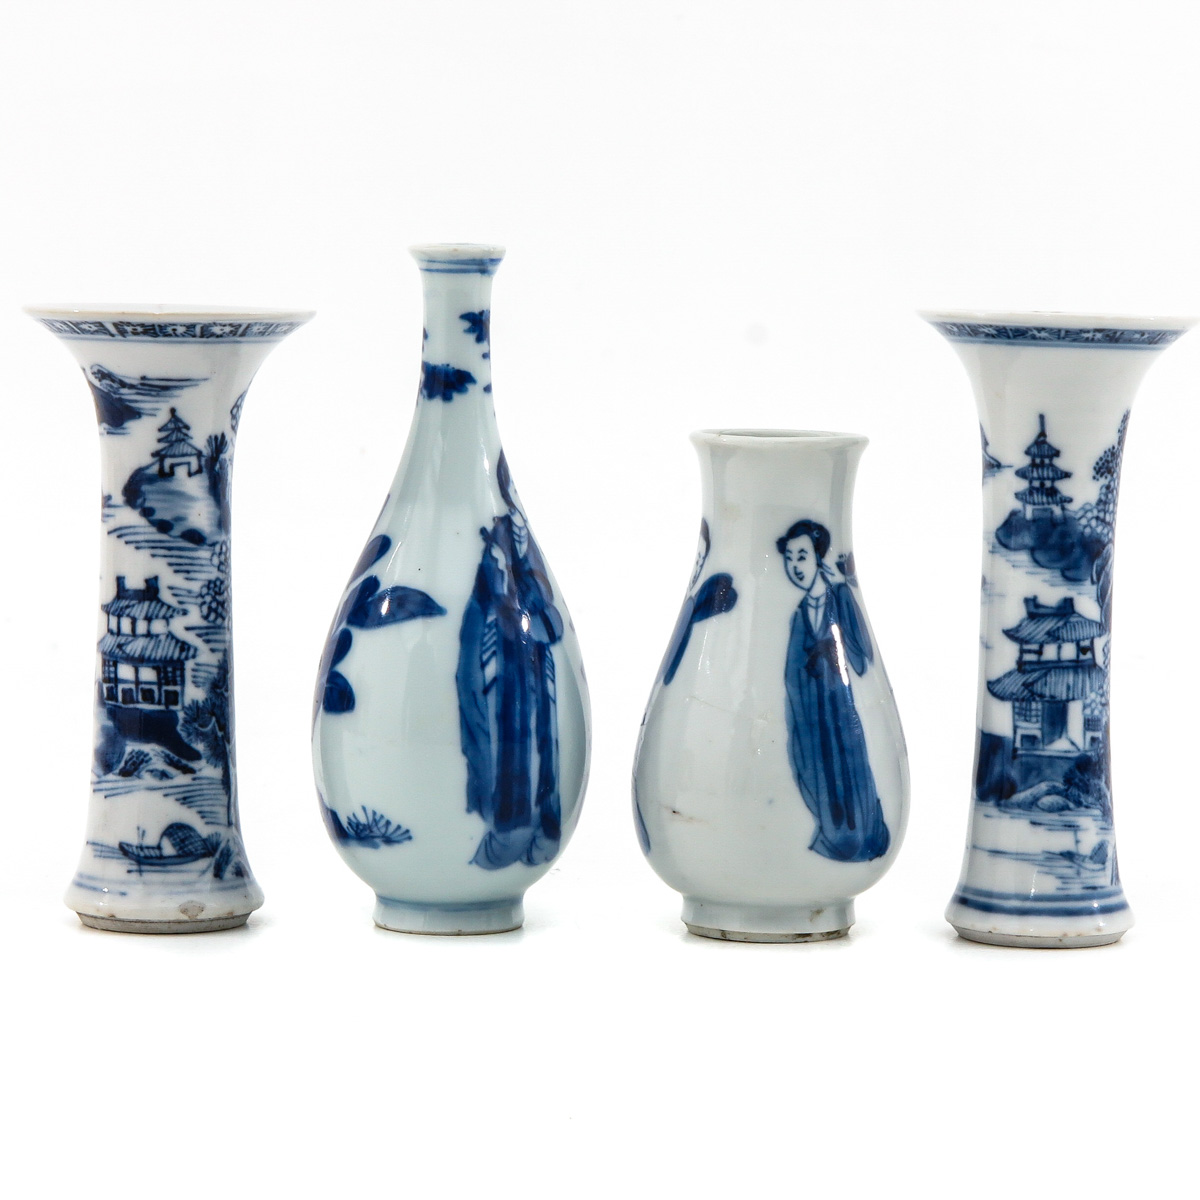 A Collection of 4 Miniature Vases - Image 4 of 10